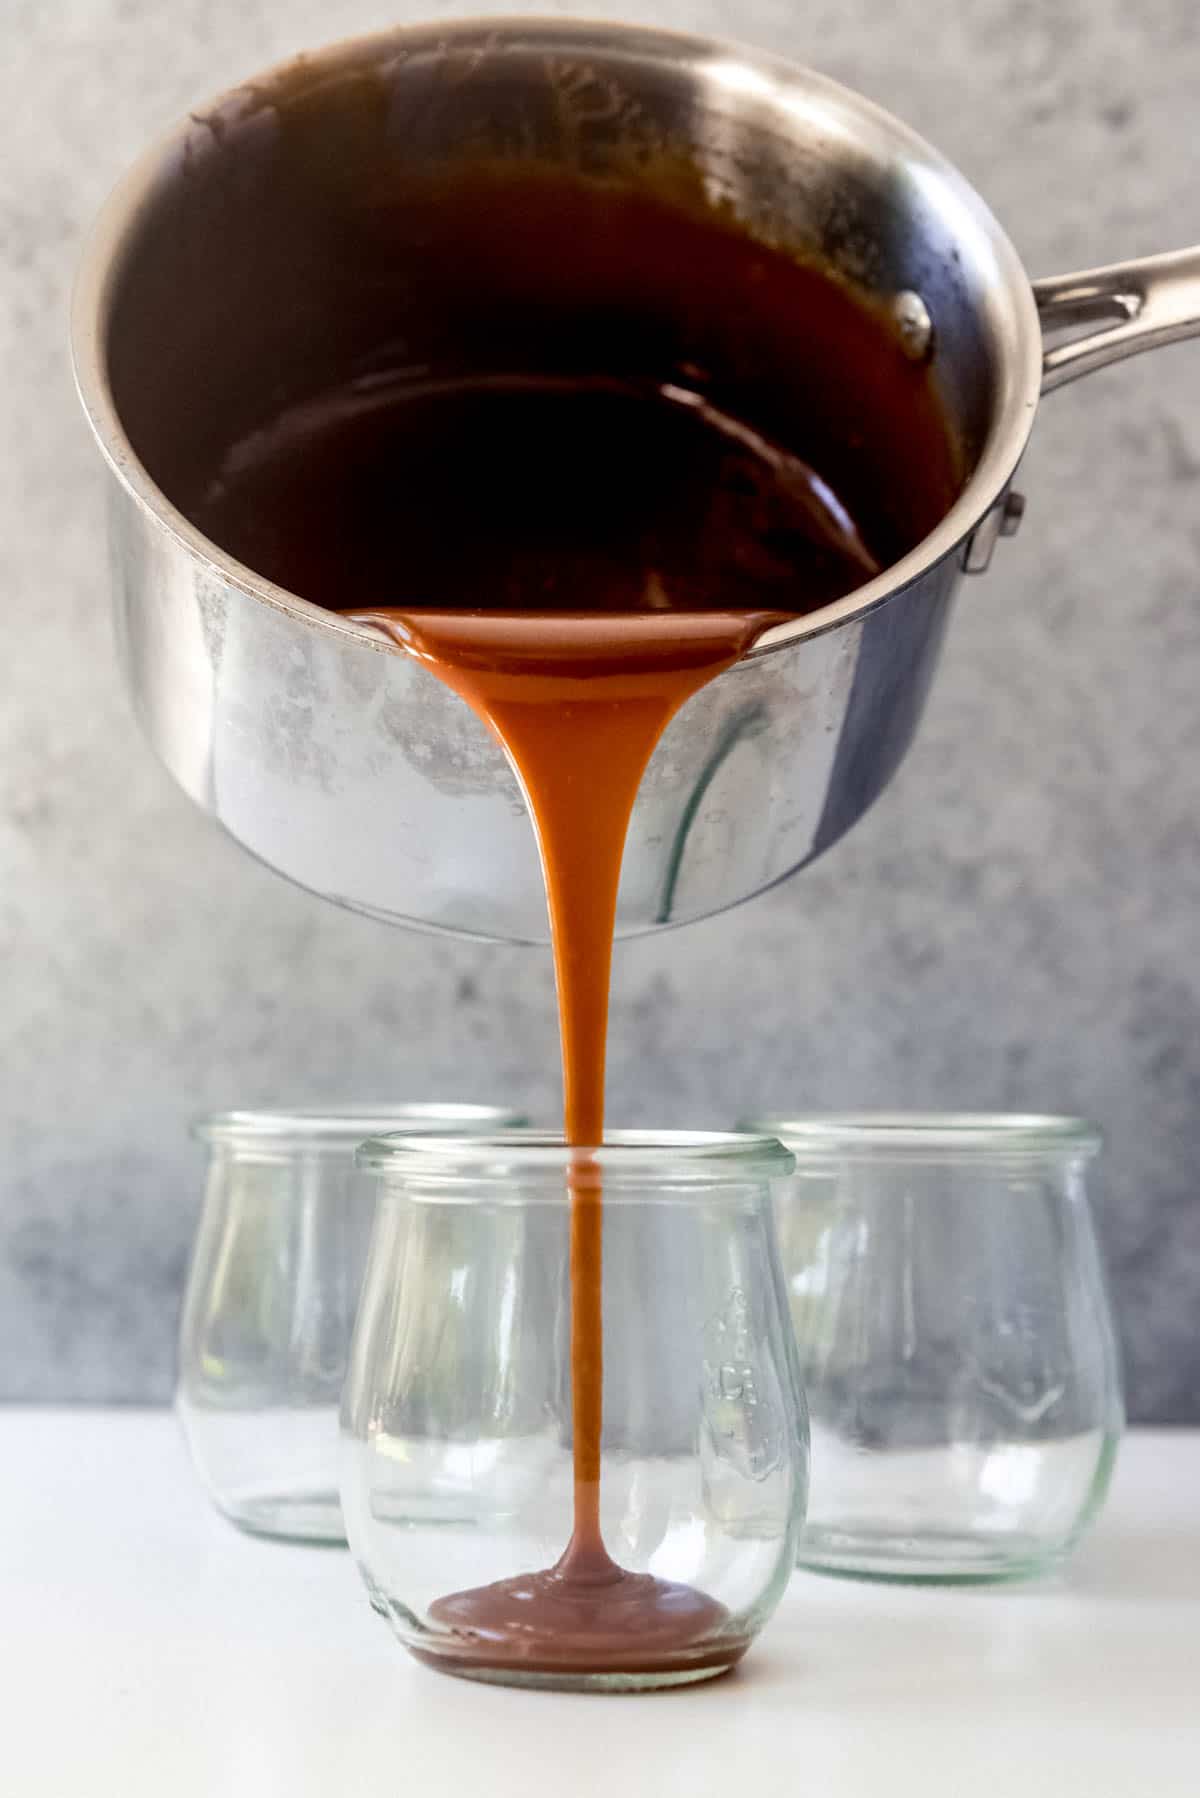 An image of salted caramel sauce pouring from a pan into glass jars for a pumpkin panna cotta with caramel sauce.